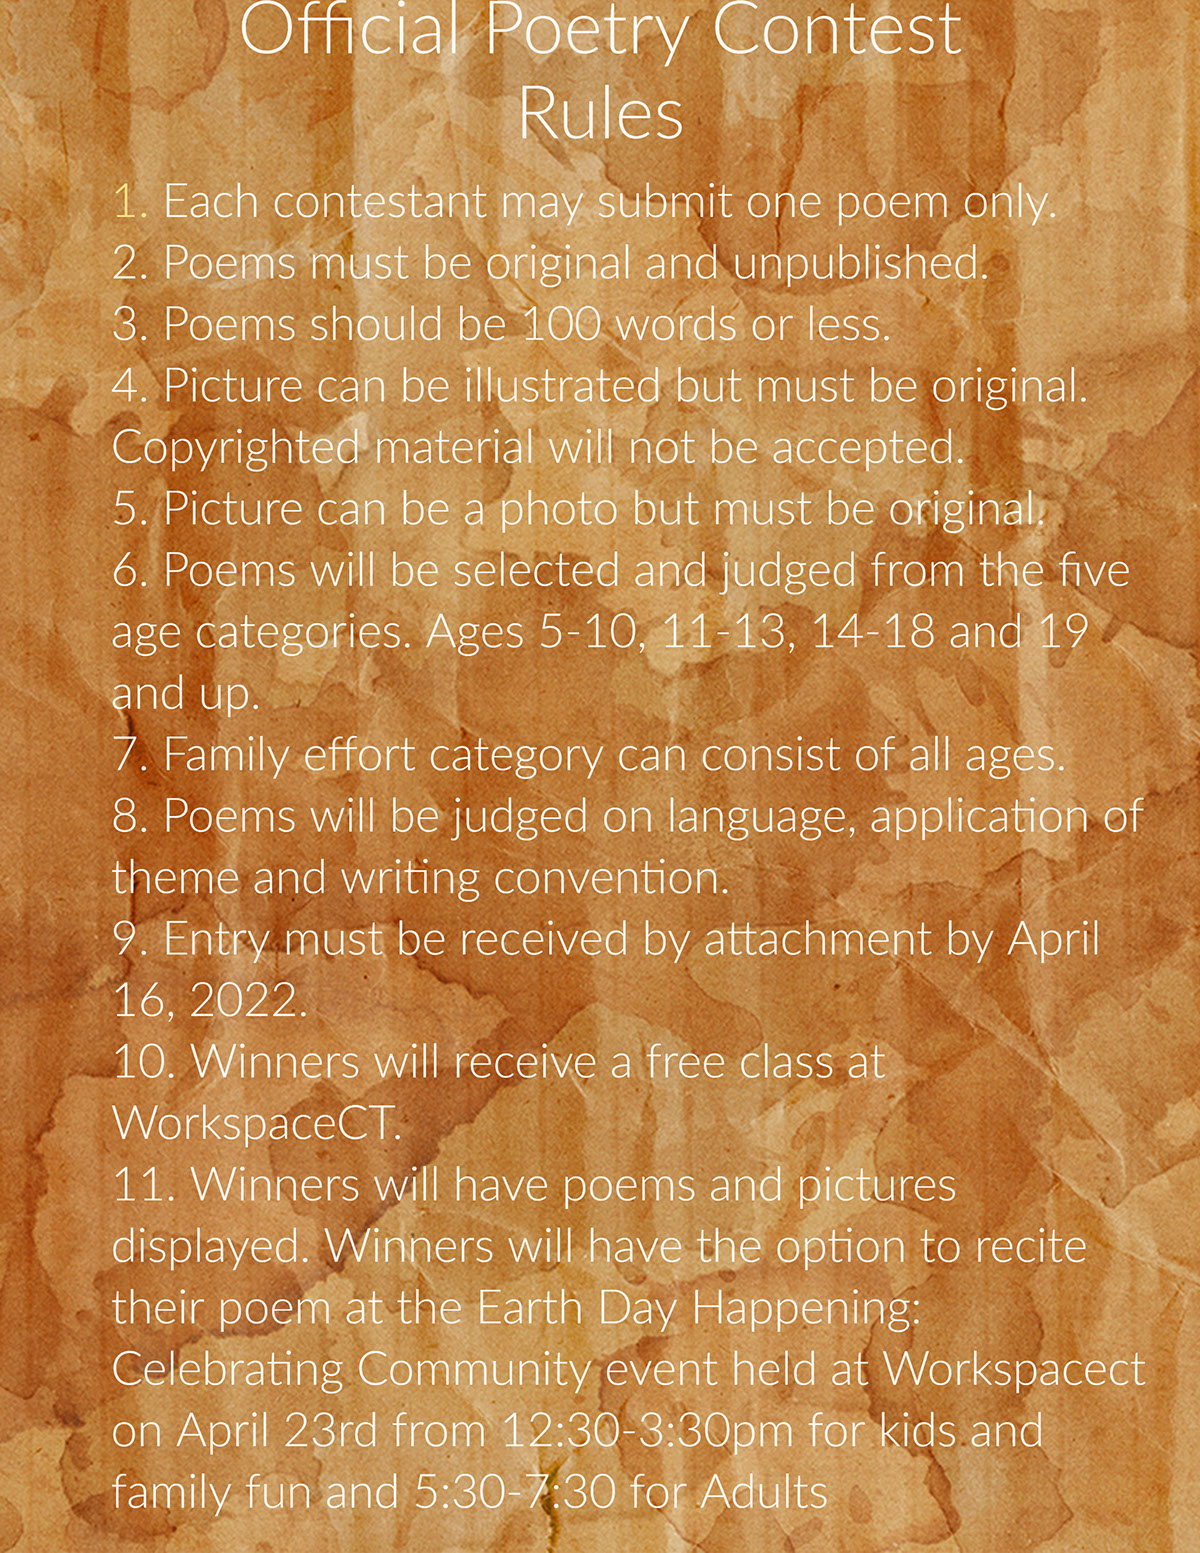 Official Poetry Contest Rules Official Poetry Contest Rules 1. Each contestant may submit one poem only. 2. Poems must be original and unpublished. 3. Poems should be 100 words or less. 4. Picture can be illustrated but must be original. Copyrighted material will not be accepted. 5. Picture can be a photo but must be original. 6. Poems will be selected and judged from the five age categories. Ages 5-10, 11-13, 14-18 and 19 and up. 7. Family effort category can consist of all ages. 8. Poems will be judged on language, application of theme and writing convention. 9. Entry must be received by attachment by April 16, 2022. 10. Winners will receive a free class at WorkspaceCT. 11. Winners will have poems and pictures displayed. Winners will have the option to recite their poem at the Earth Day Happening: Celebrating Community event held at Workspacect on April 23rd from 12:30-3:30pm for kids and family fun and 5:30-7:30 for Adults